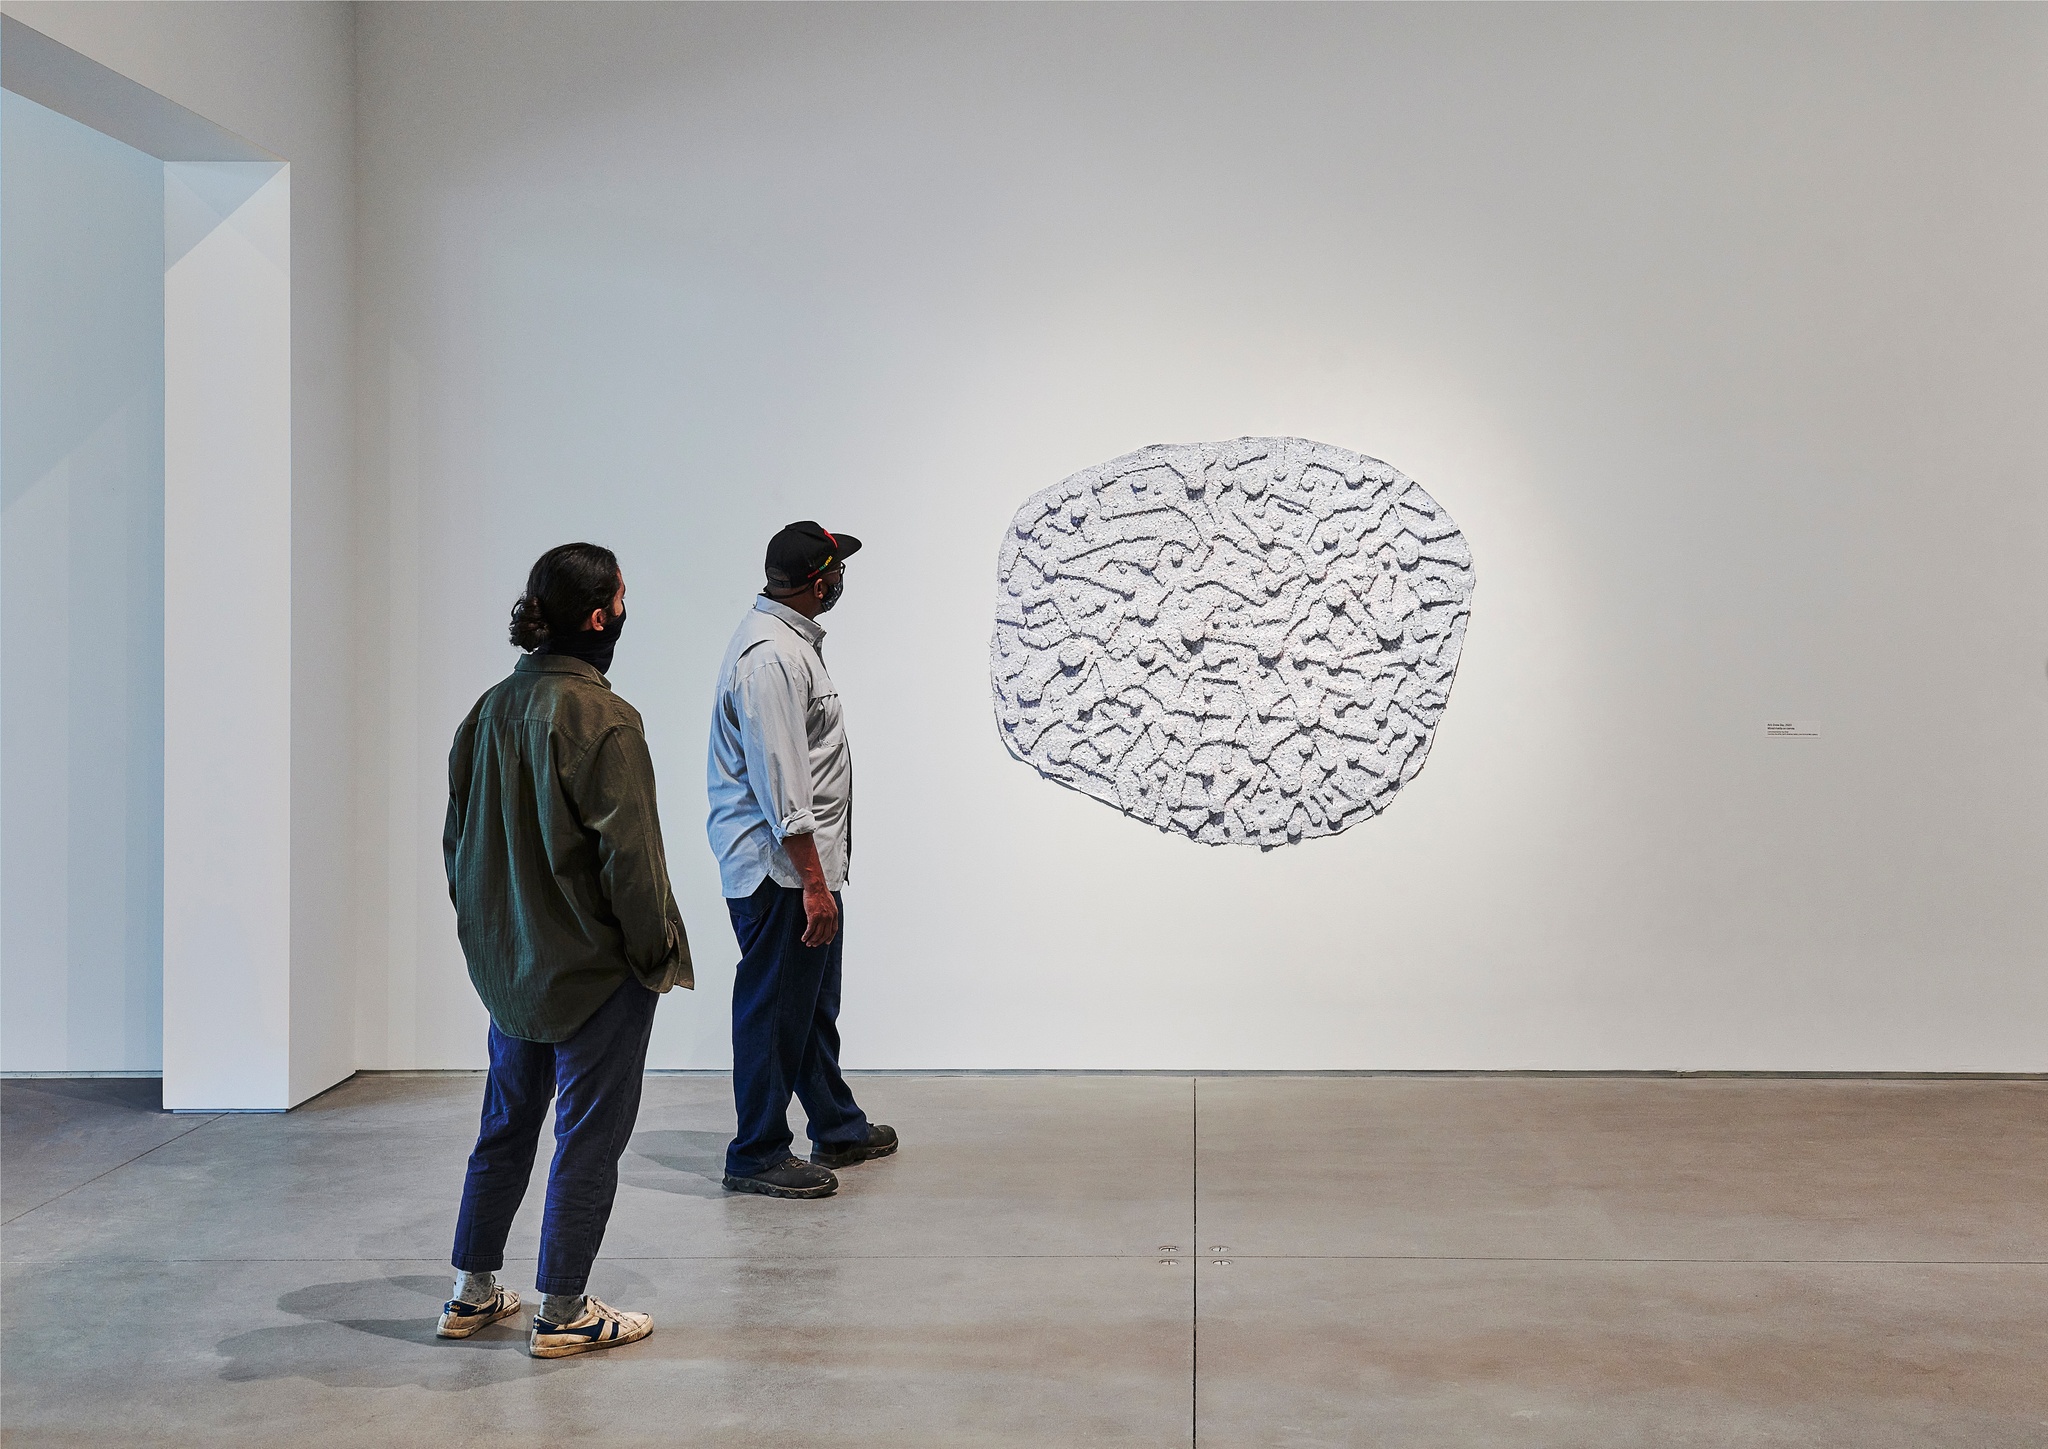 Two gallery visitors standing staggered from one another look at a curvilinear abstract painting in the exhibition Howardena Pindell: Rope/Fire/Water. The painting is a pale purple and its surface is covered in glitter, paper dots, and geometric forms that give it texture and depth.